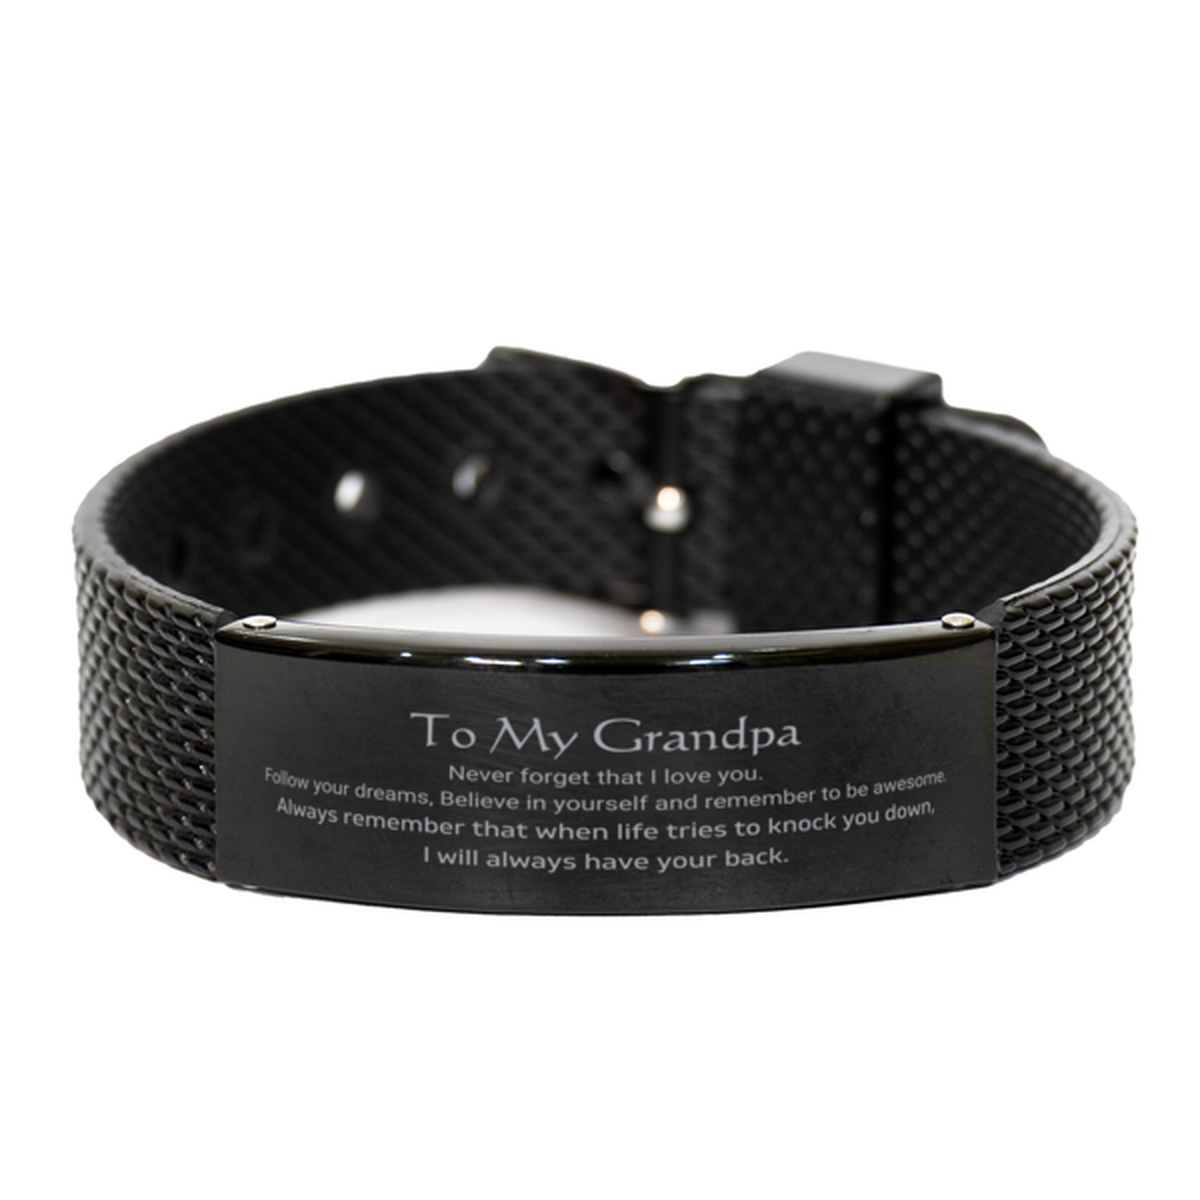 Inspirational Gifts for Grandpa, Follow your dreams, Believe in yourself, Grandpa Black Shark Mesh Bracelet, Birthday Christmas Unique Gifts For Grandpa